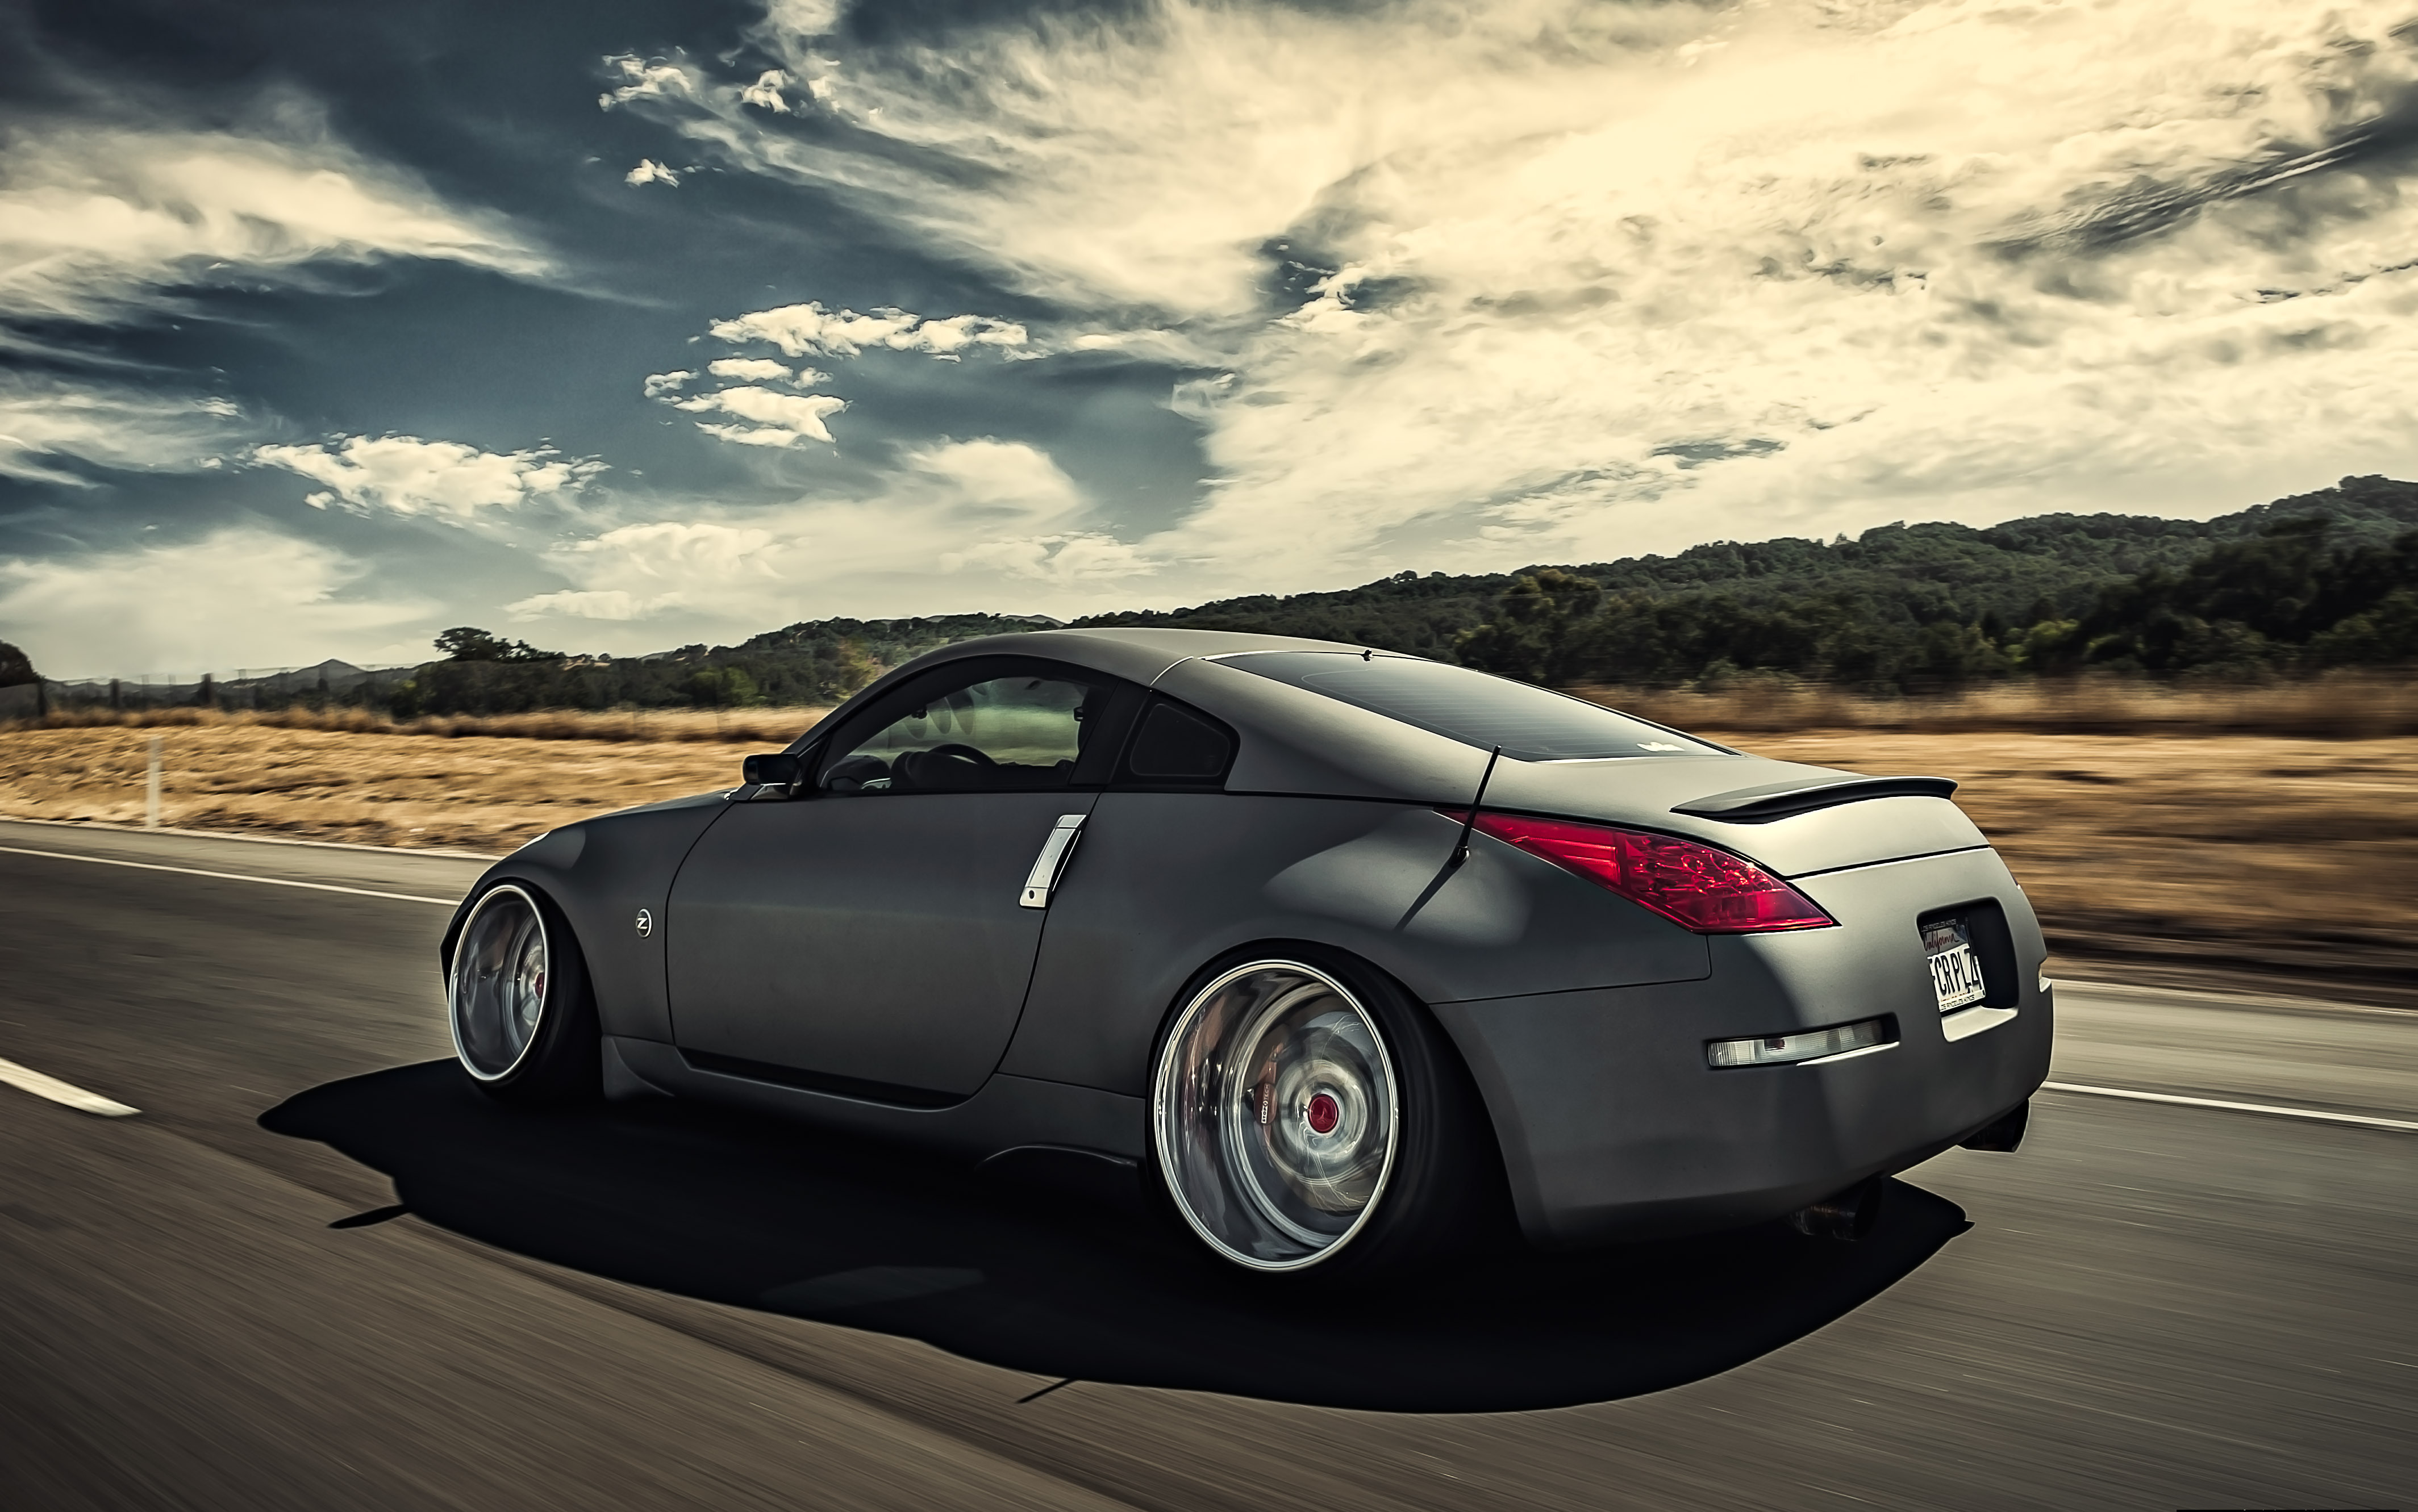 Mobile wallpaper cars, nissan, traffic, movement, side view, speed, stance, 350z